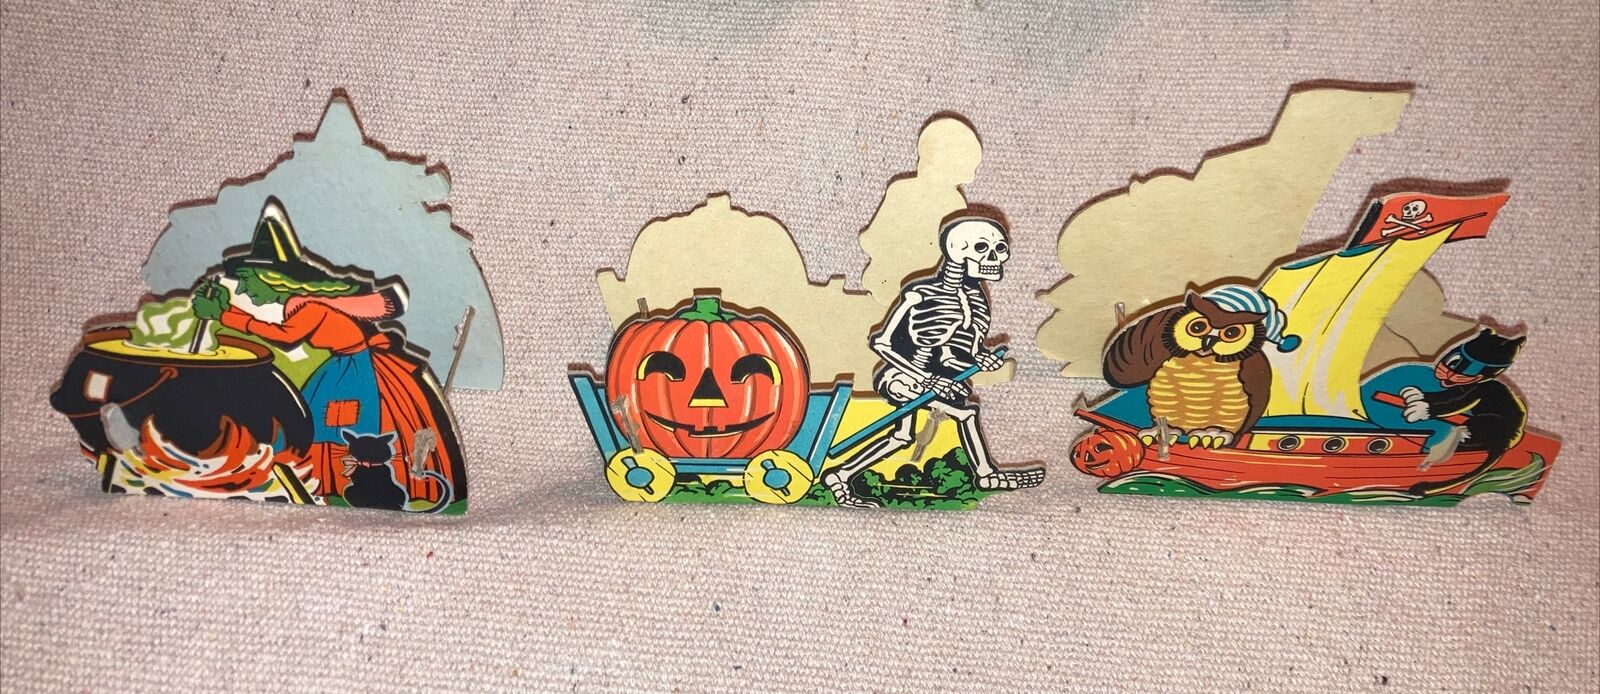 3 Vintage Witch Skeleton Pirate Ship Cardboard Halloween Candy Containers G.M.CO